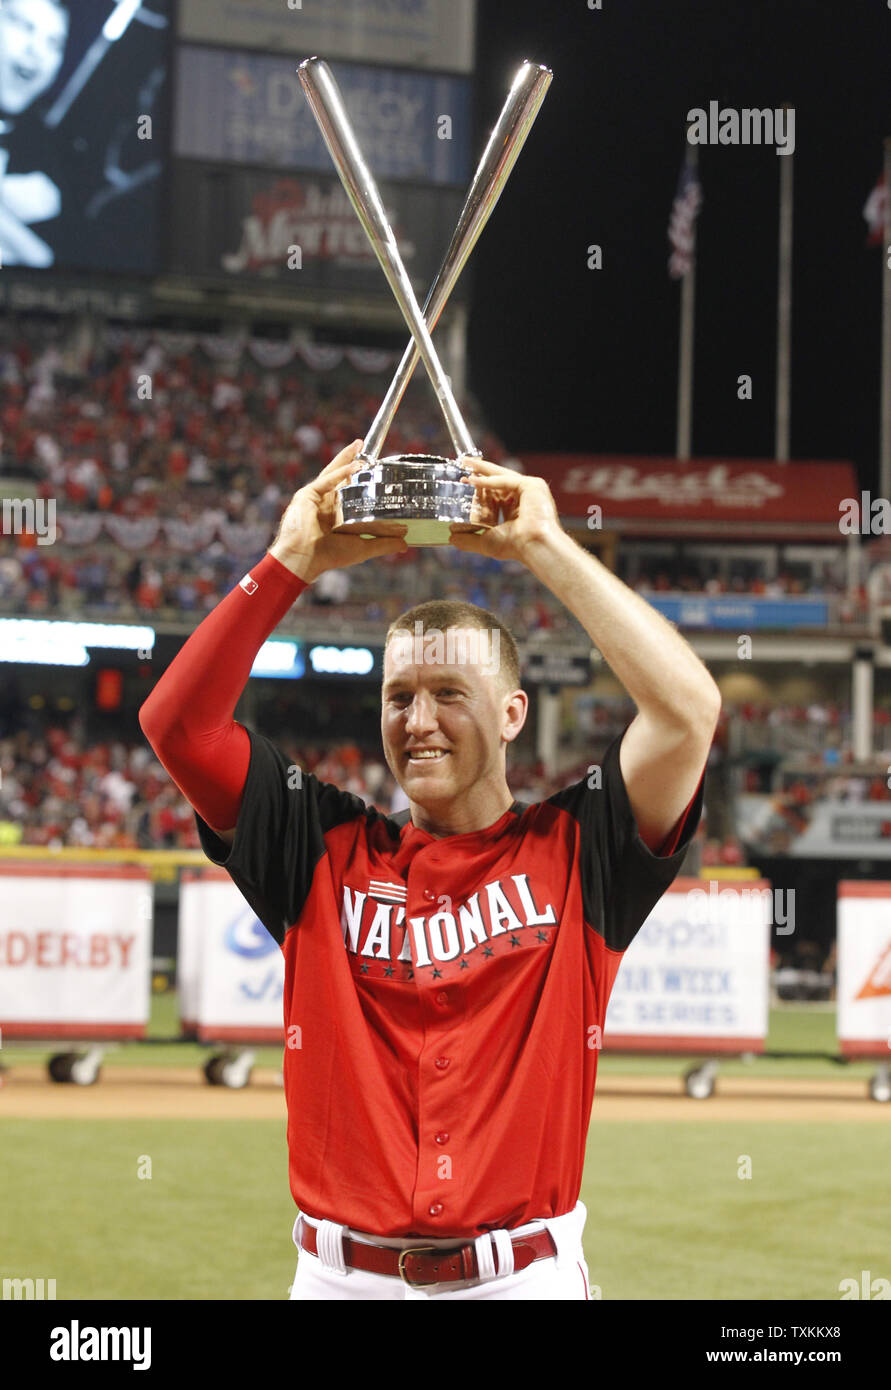 National League's Todd Frazier holds up the Home Run Derby trophy after  defeating Joc Pederson in the Home Run Derby during the 86th All-Star Game  at Great American Ball Park in Cincinnati